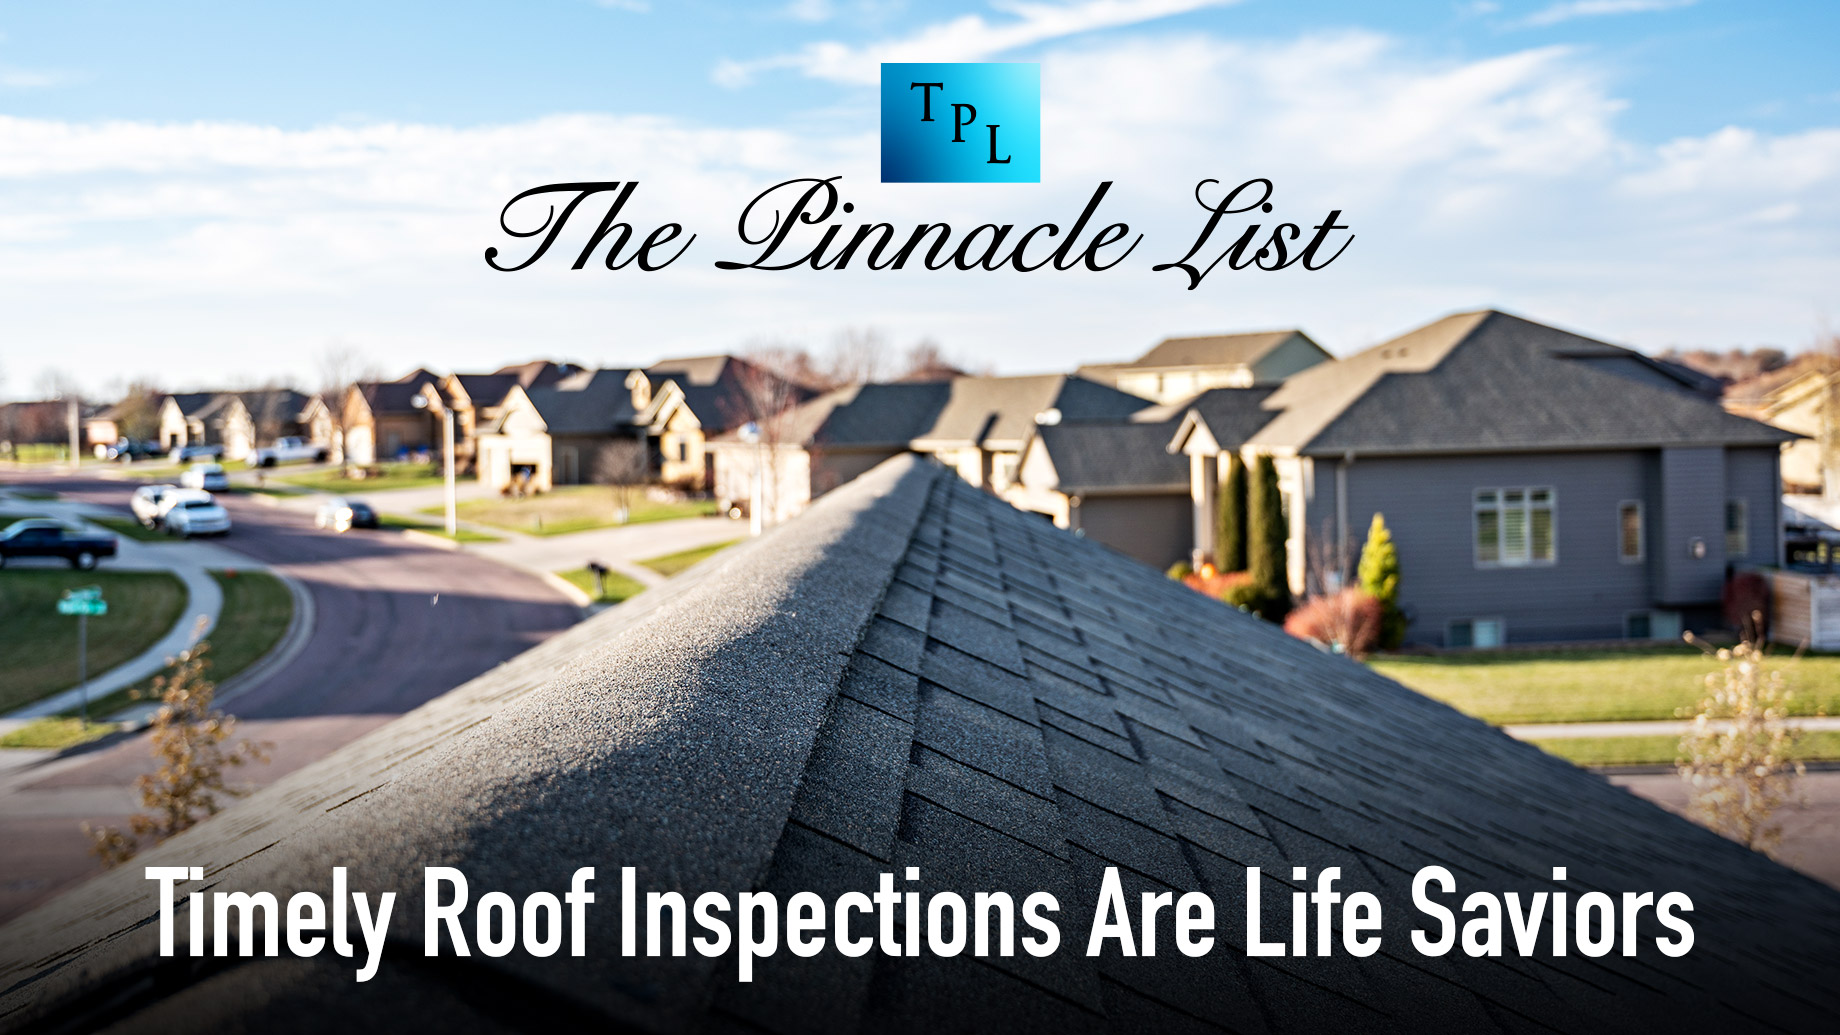 Timely Roof Inspections Are Life Saviors